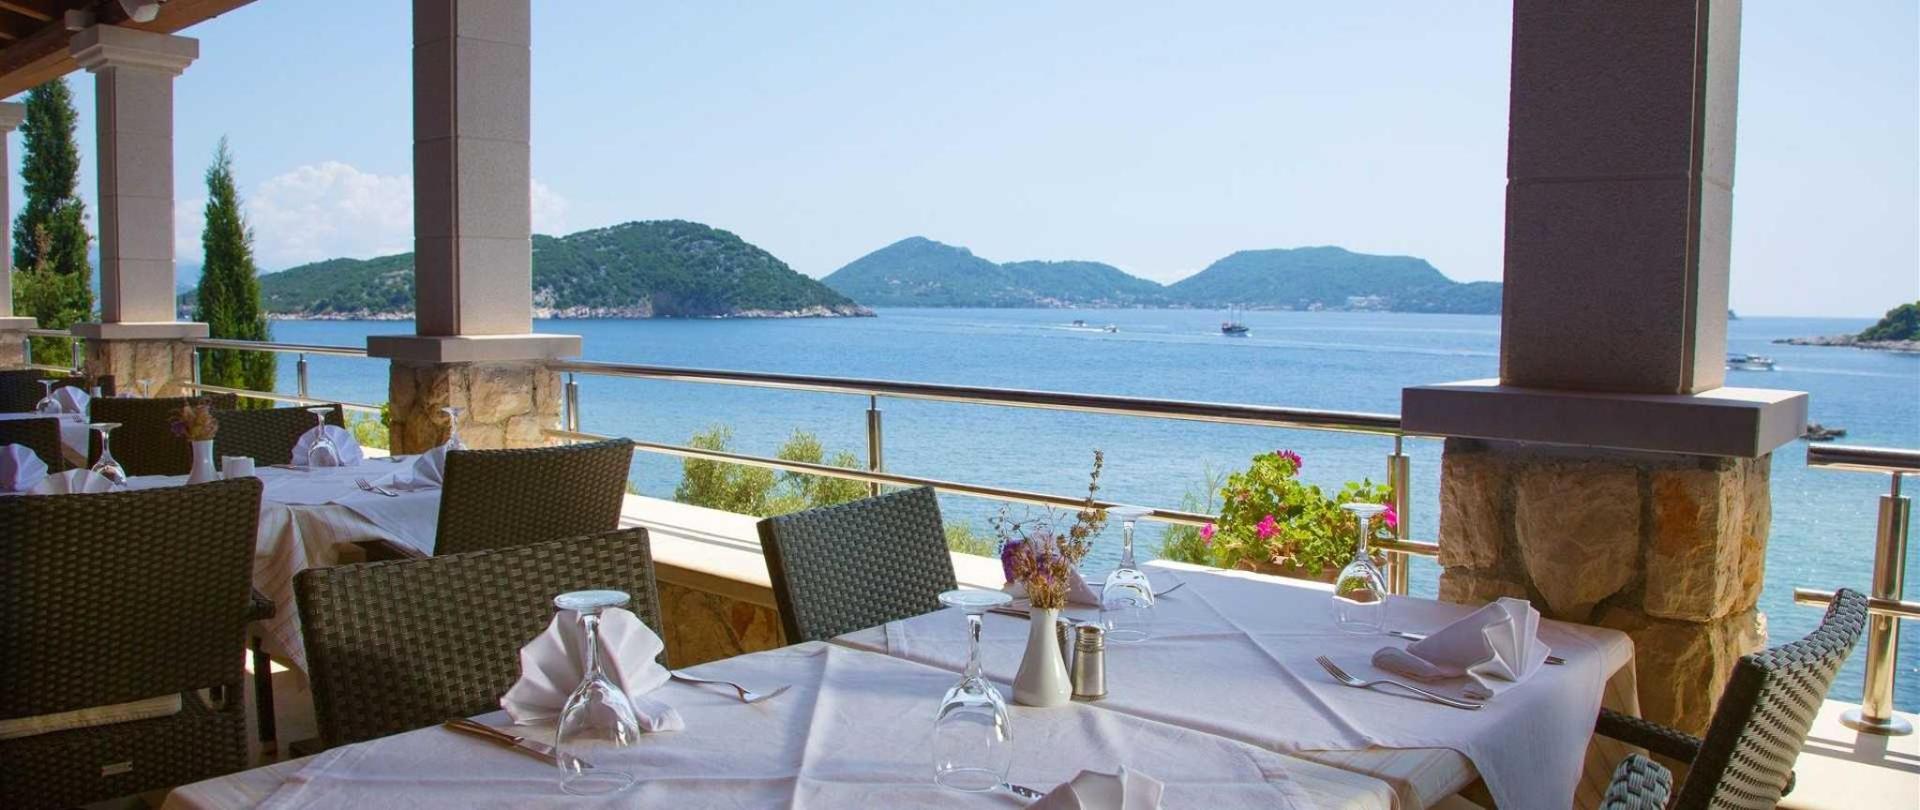 SEAFRONT BOUTIQUE HOTEL FOR RENT SIPAN DUBROVNIK